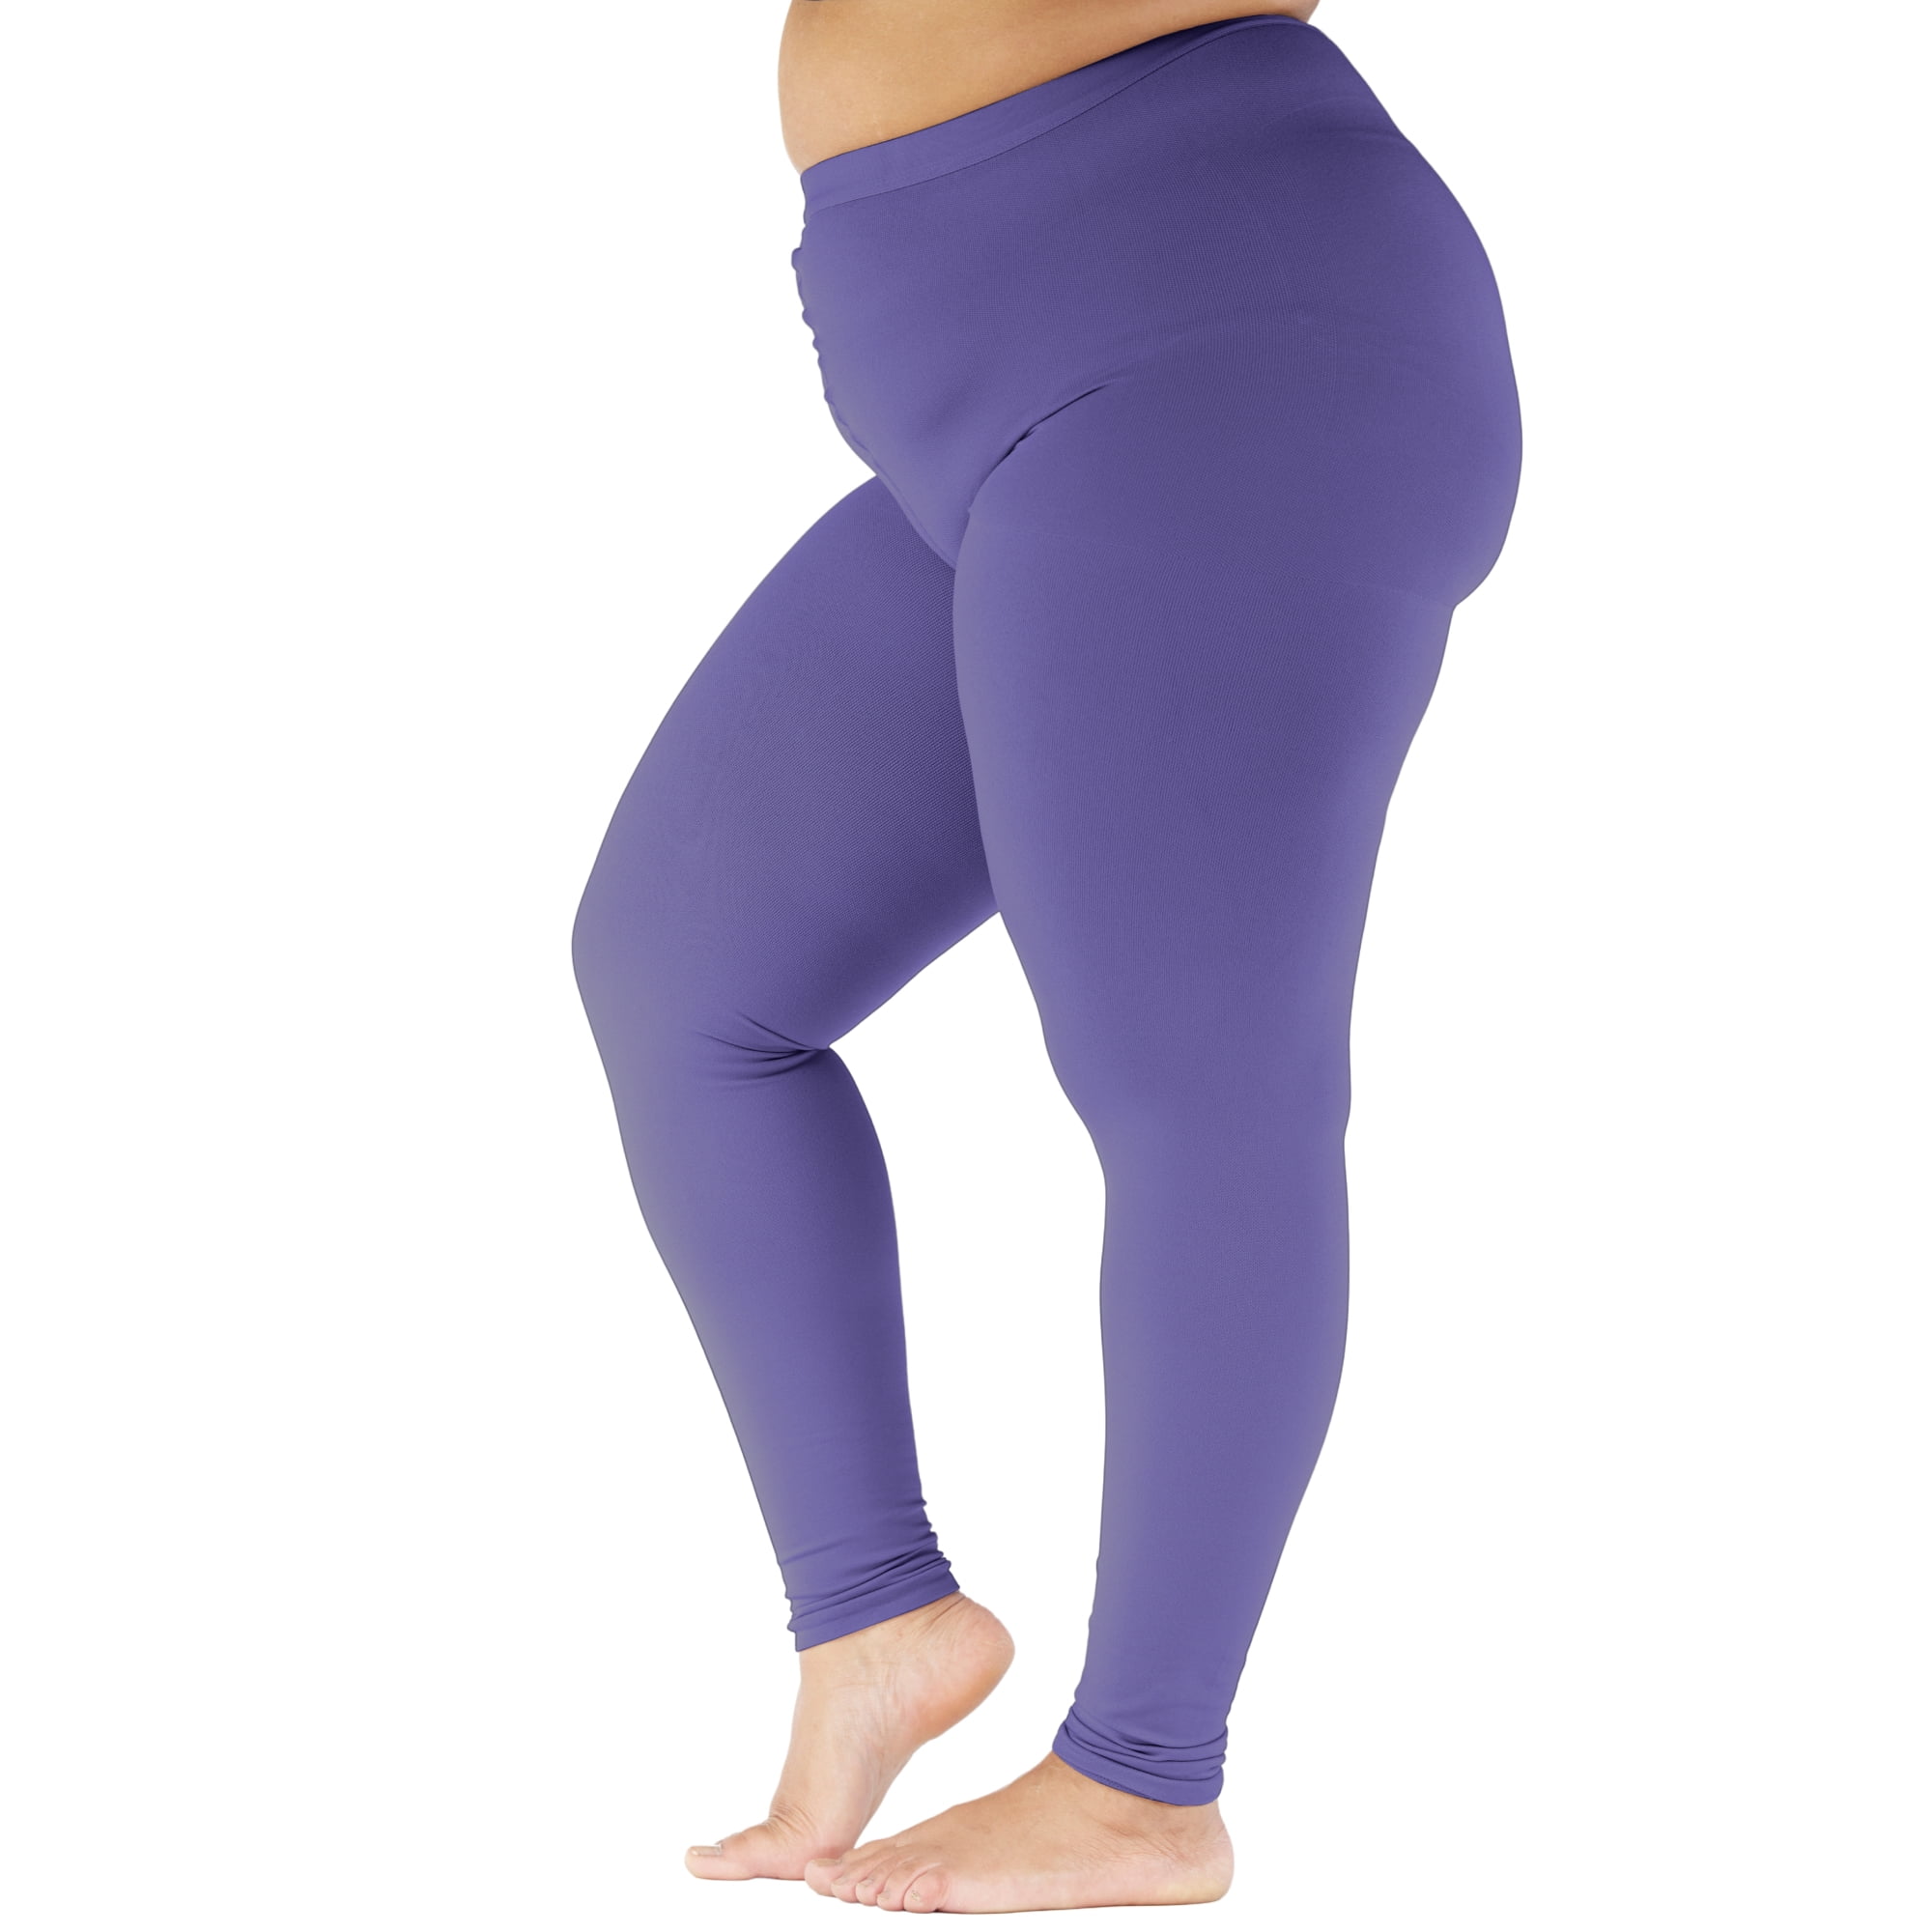 4XL Plus Size Compression Footless Pantyhose for Women 20-30mmHg - Purple,  4X-Large 